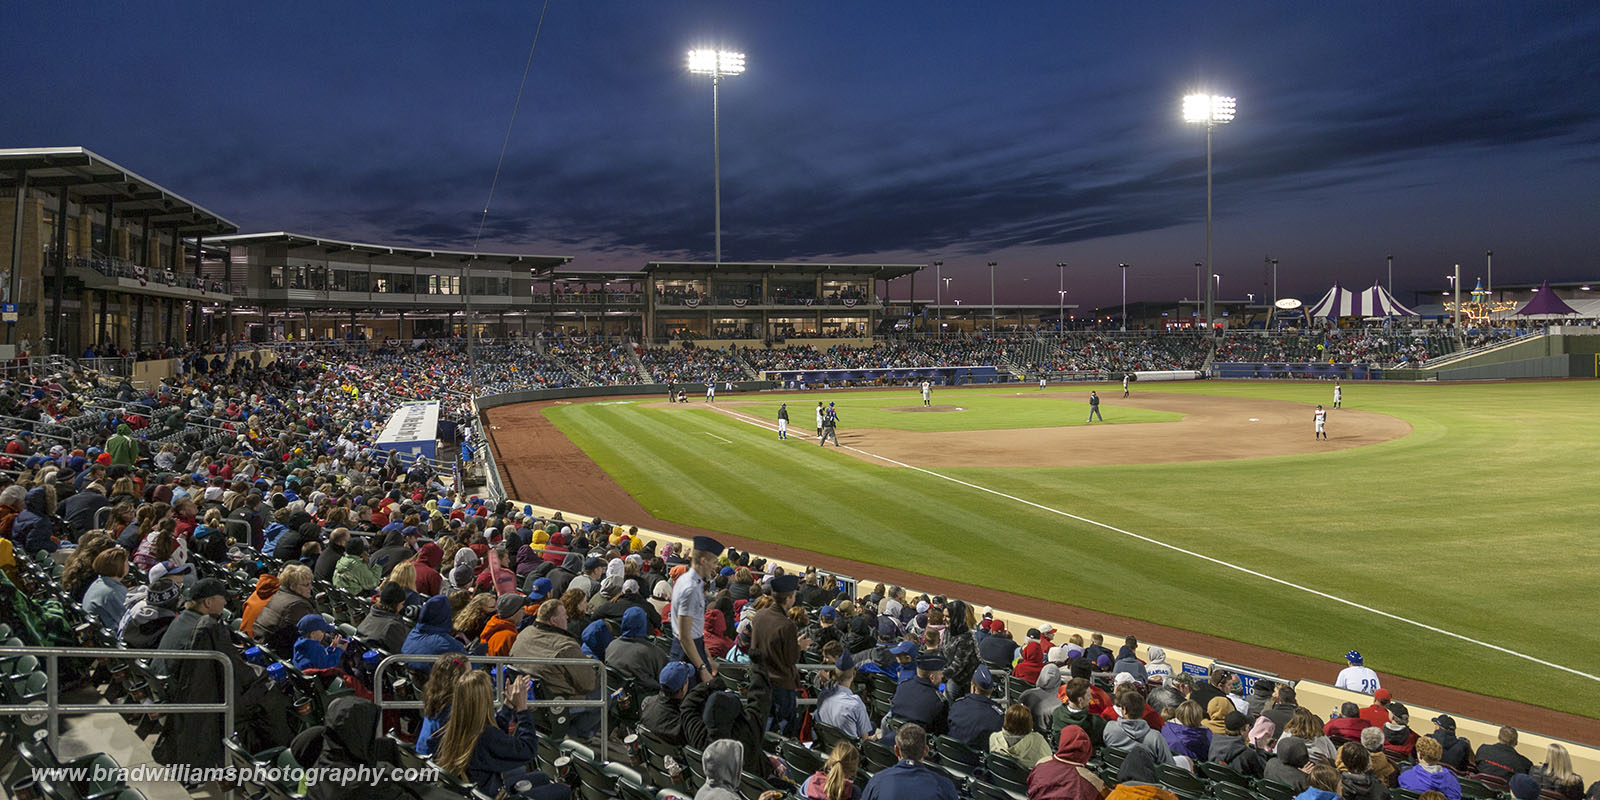 Opening Night for the Omaha Storm Chasers at Werner Park in Papillion, Nebraska